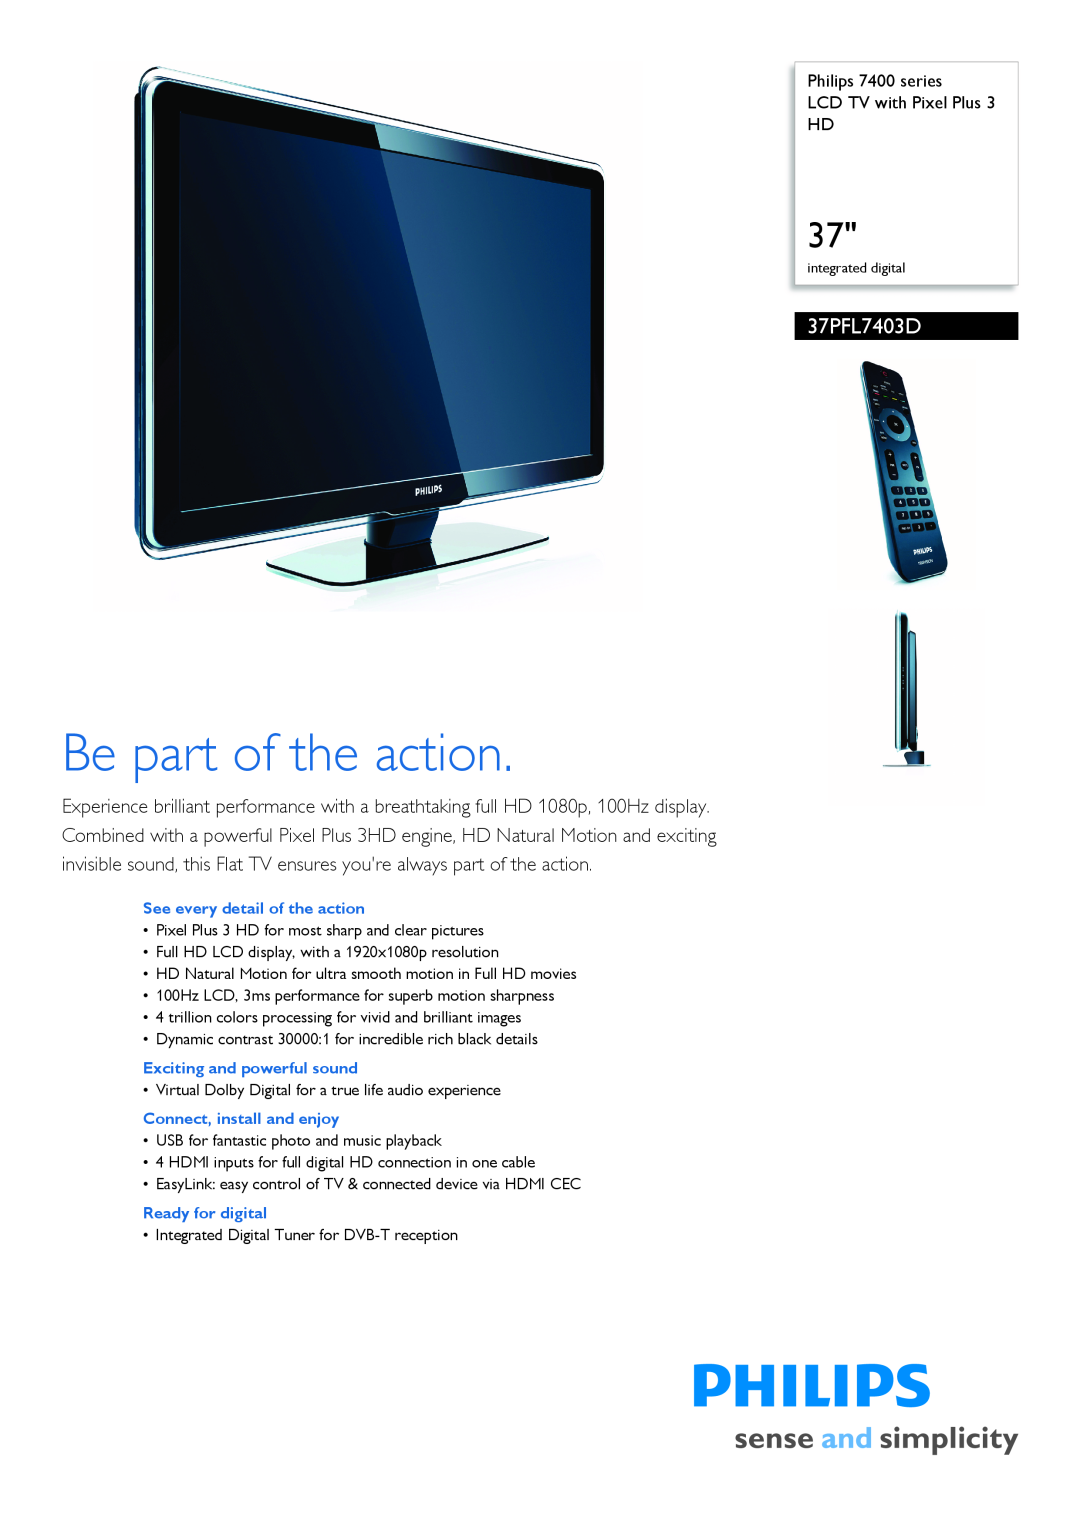 Philips 37PFL7403D/10 manual Philips 7400 series LCD TV with Pixel Plus HD, Be part of the action 